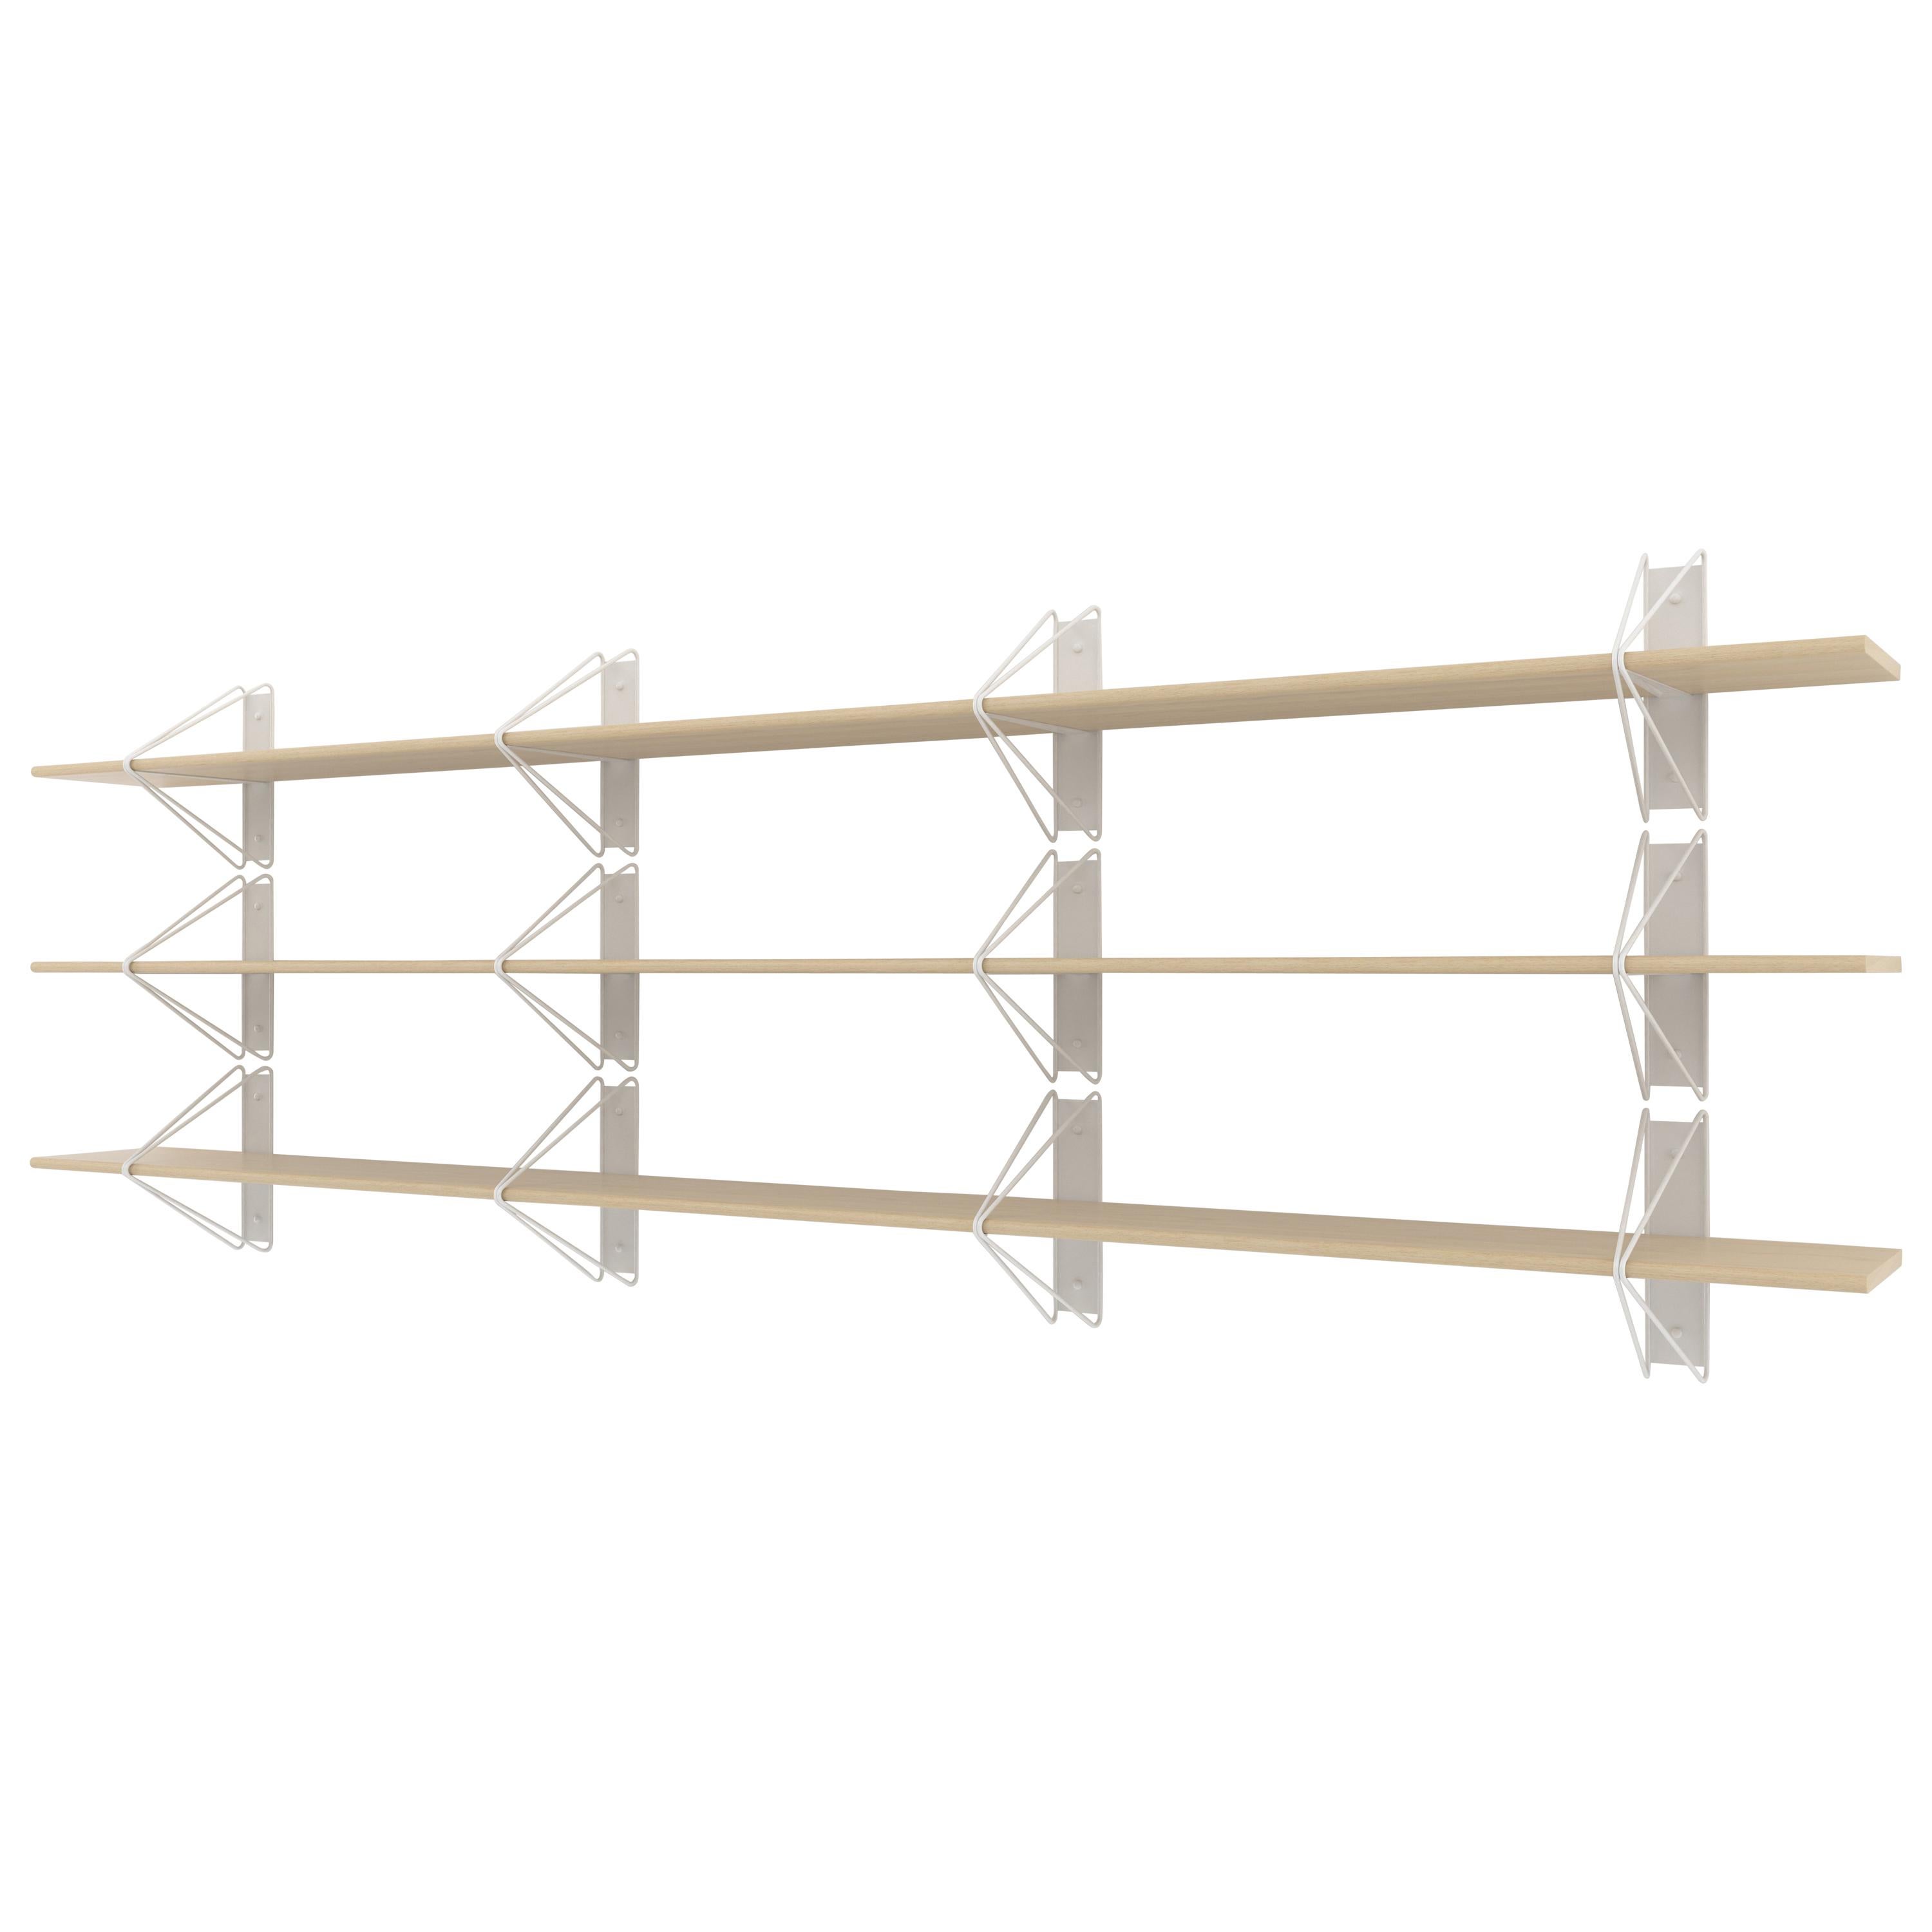 Set of 3 Strut Shelves from Souda, Maple, Extra Long, Made to Order